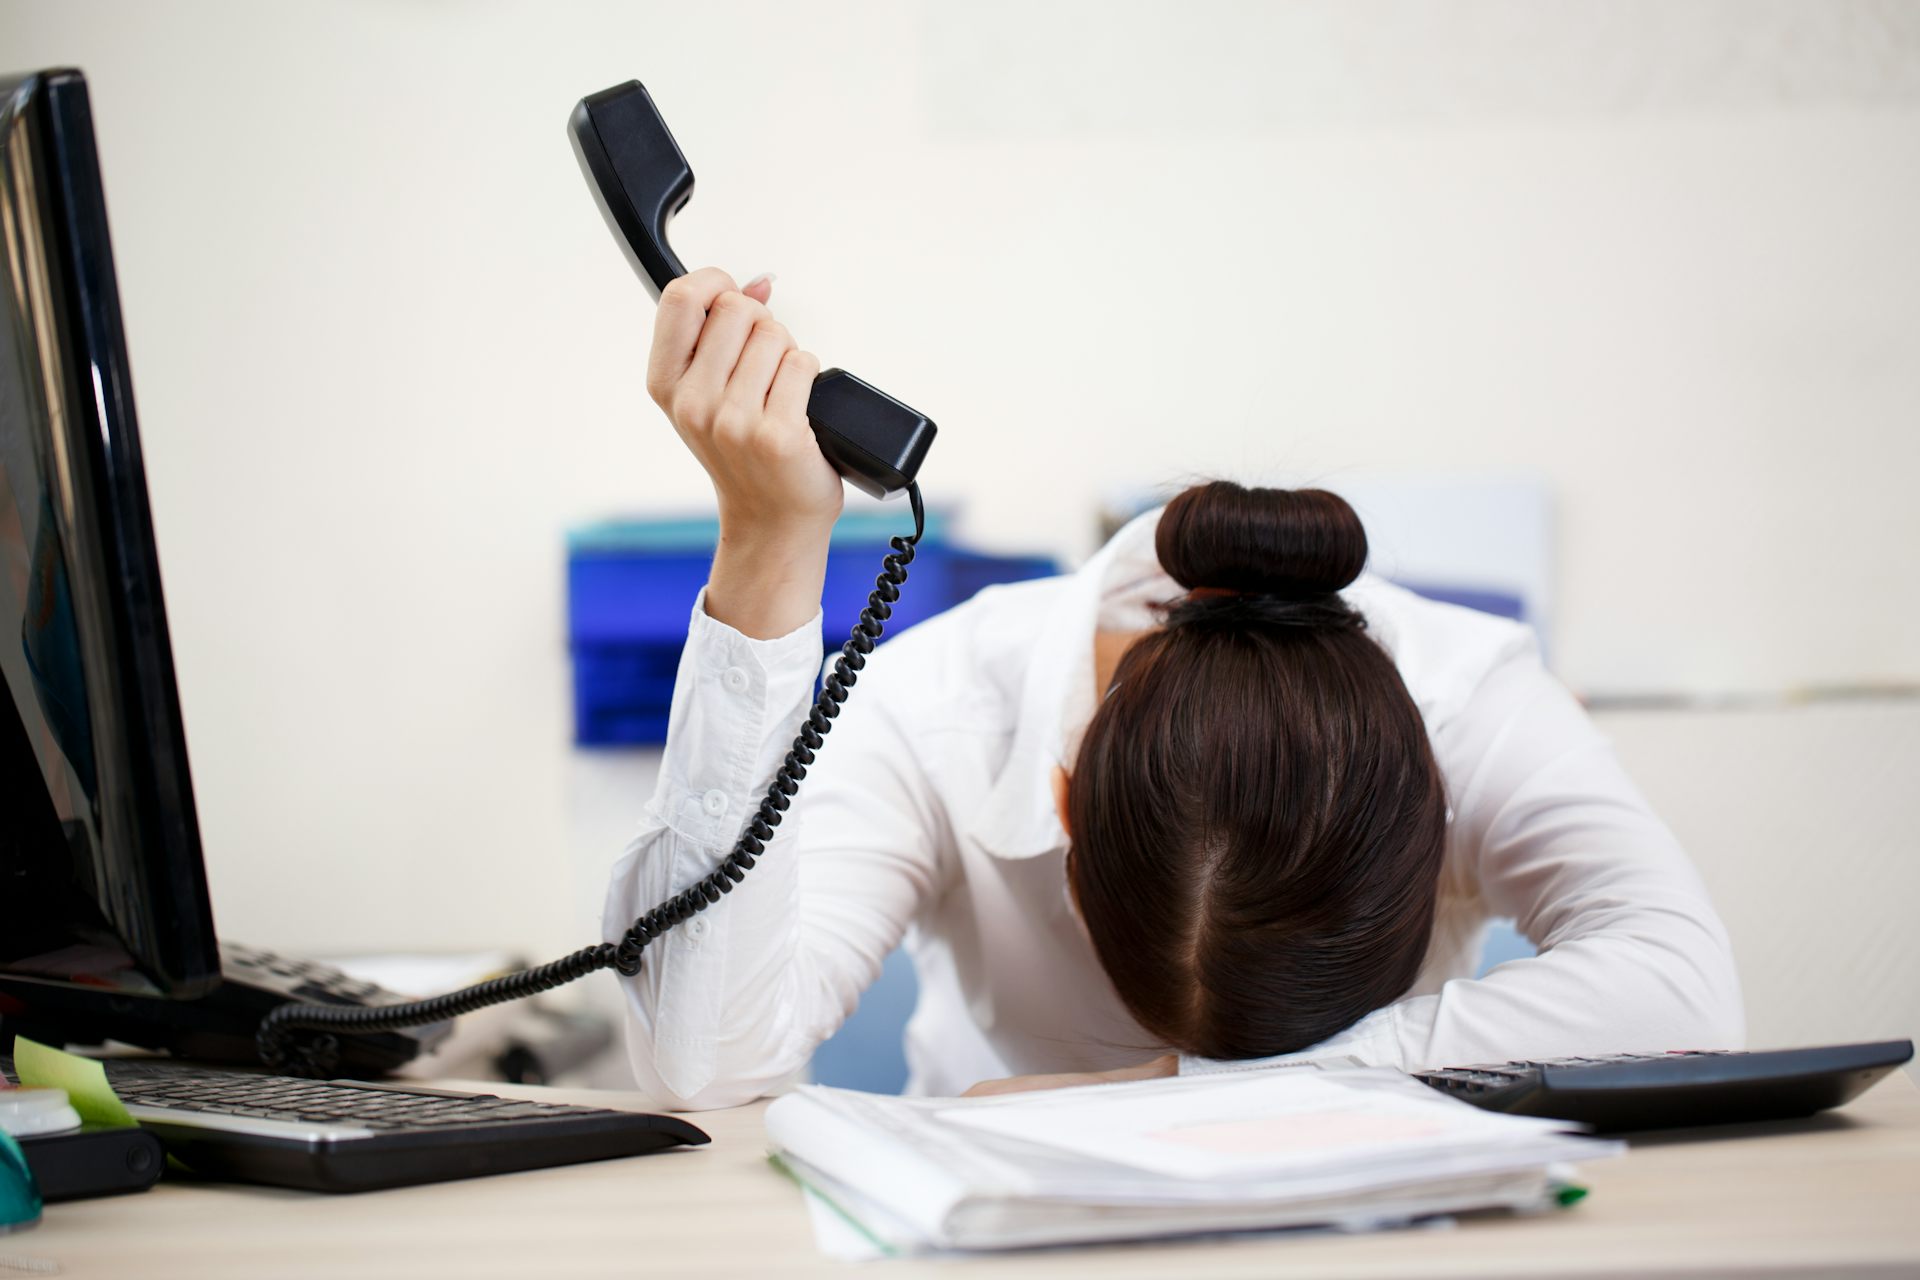 Phone Call Anxiety: Why So Many of Us Have It, and How to Get Over It